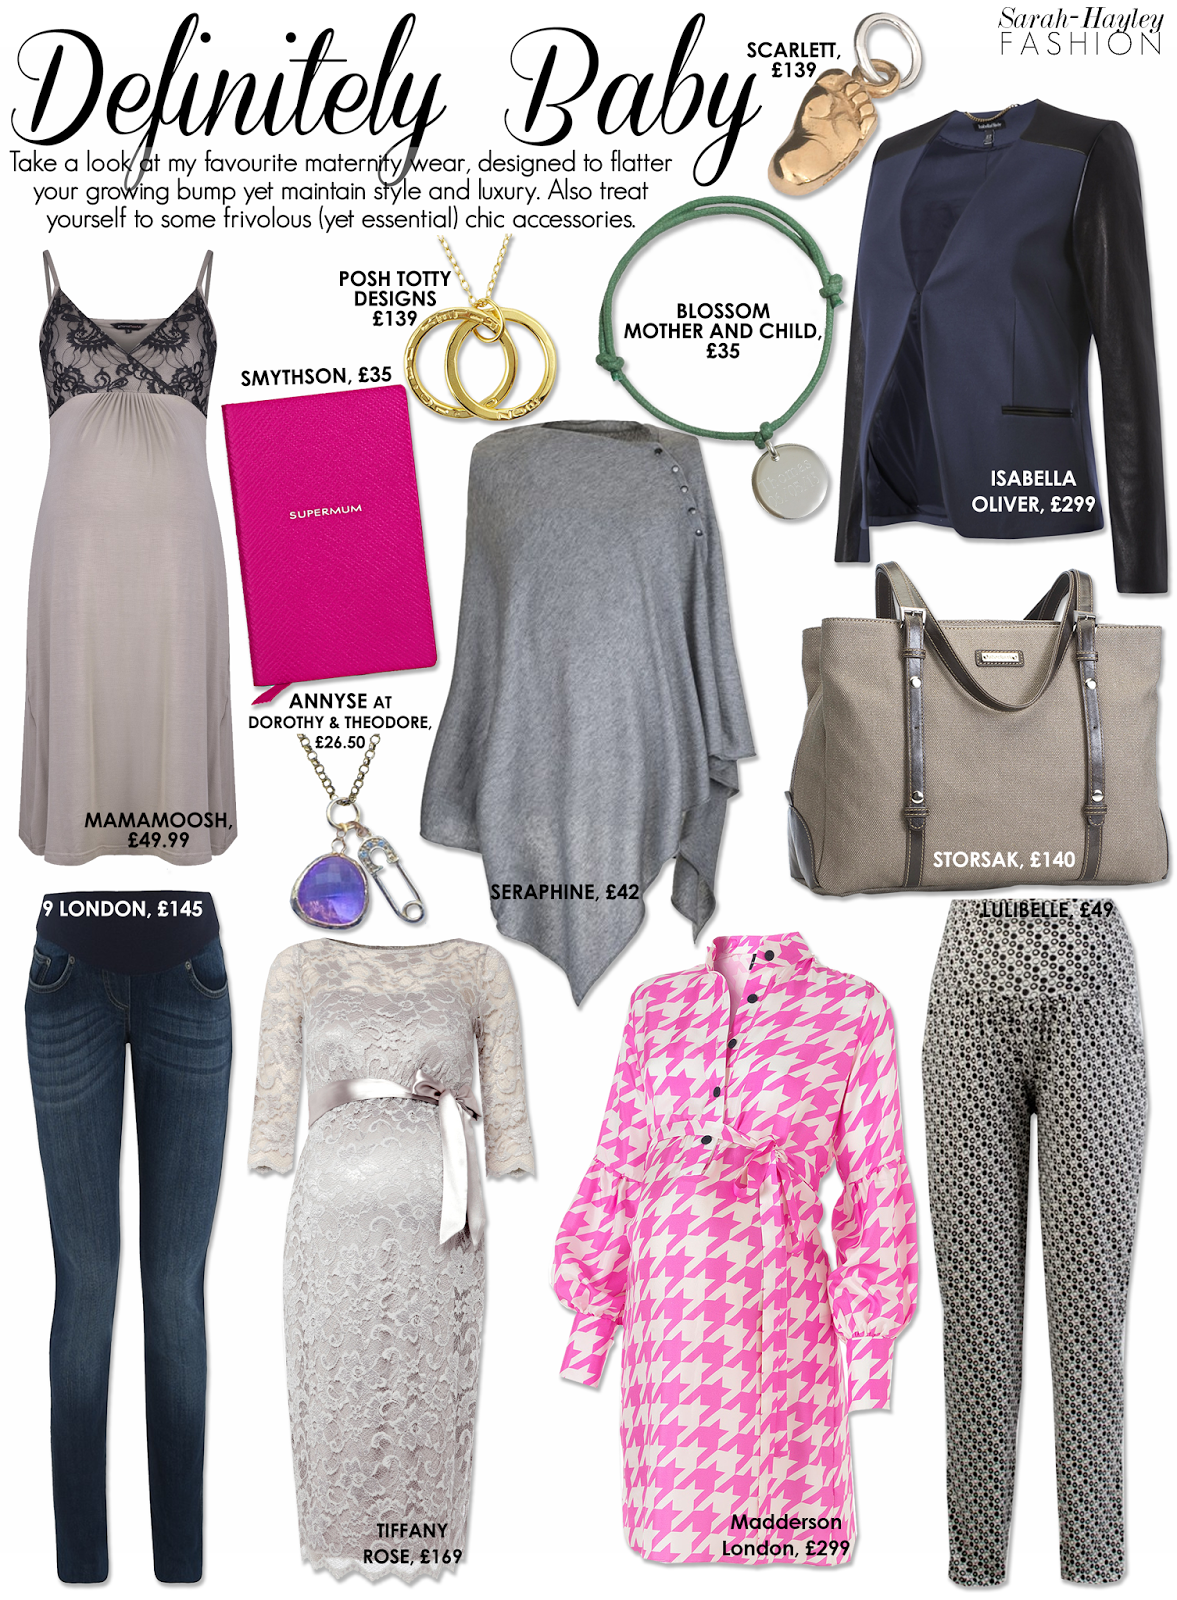 Definitely Baby - Stylish Maternity Wear and Accessories - by Sarah ...